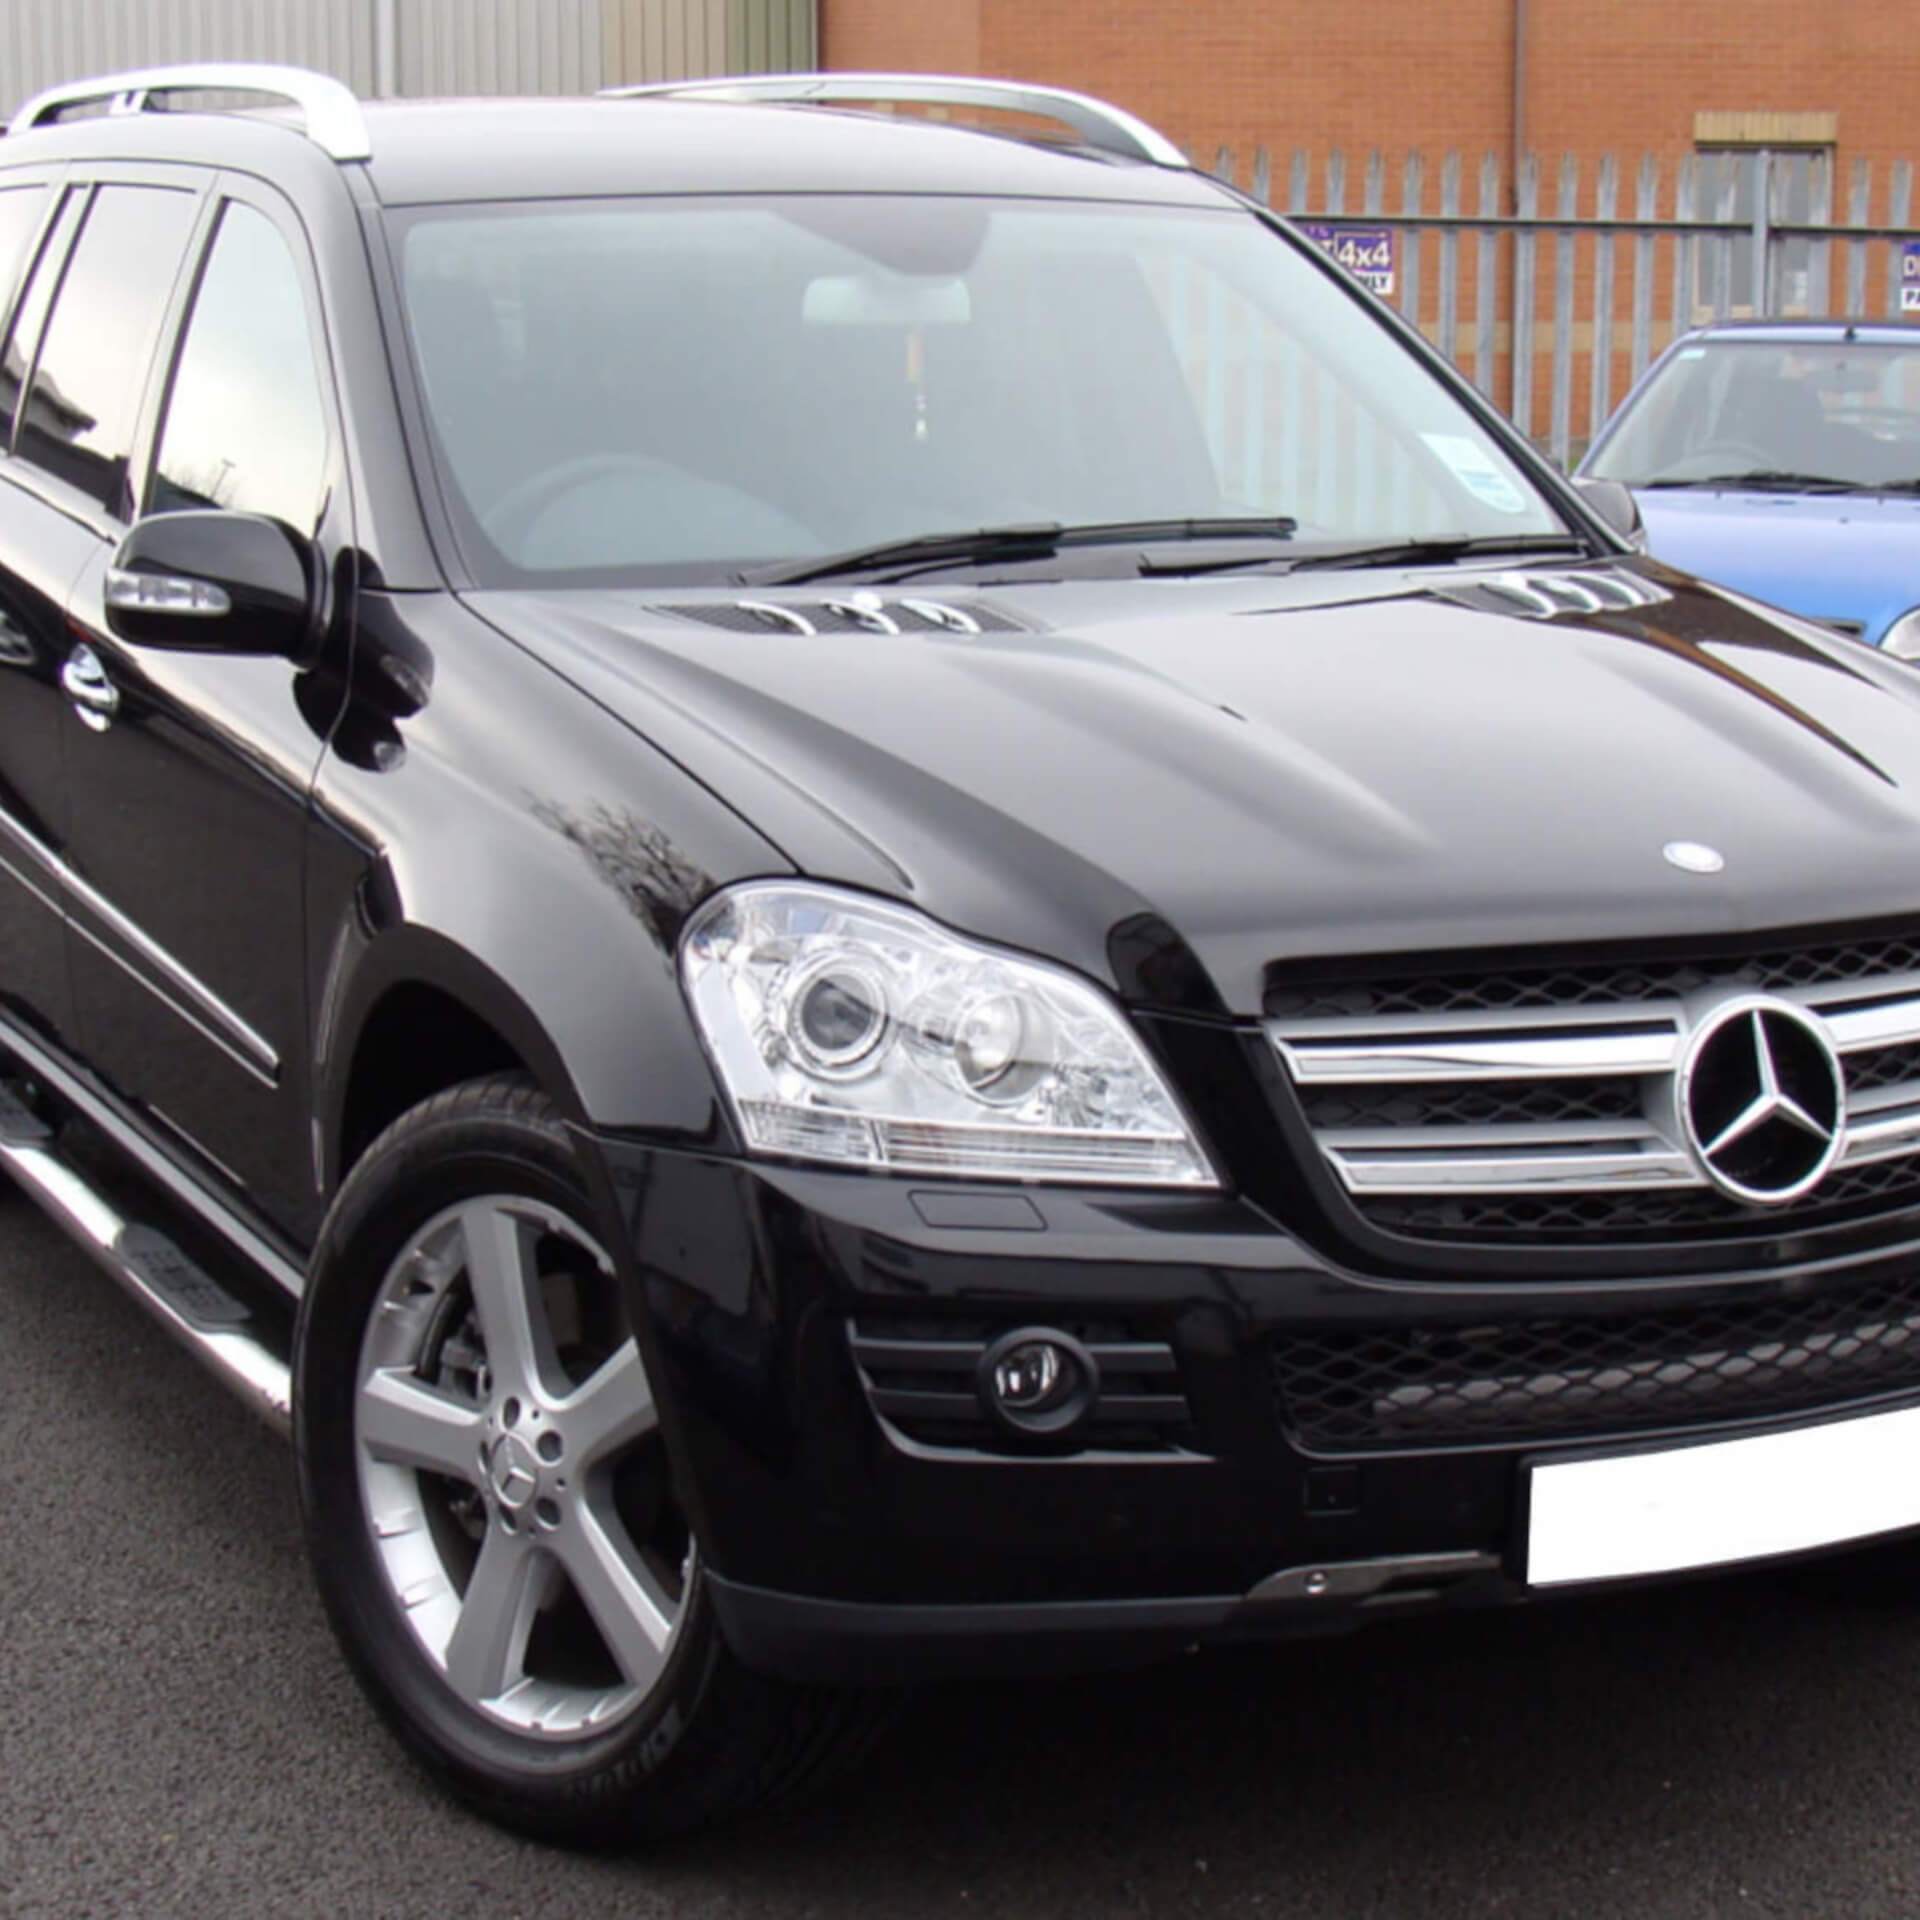 Direct4x4 accessories for Mercedes GL vehicles with a photo of a black Mercedes GL parked in a car park